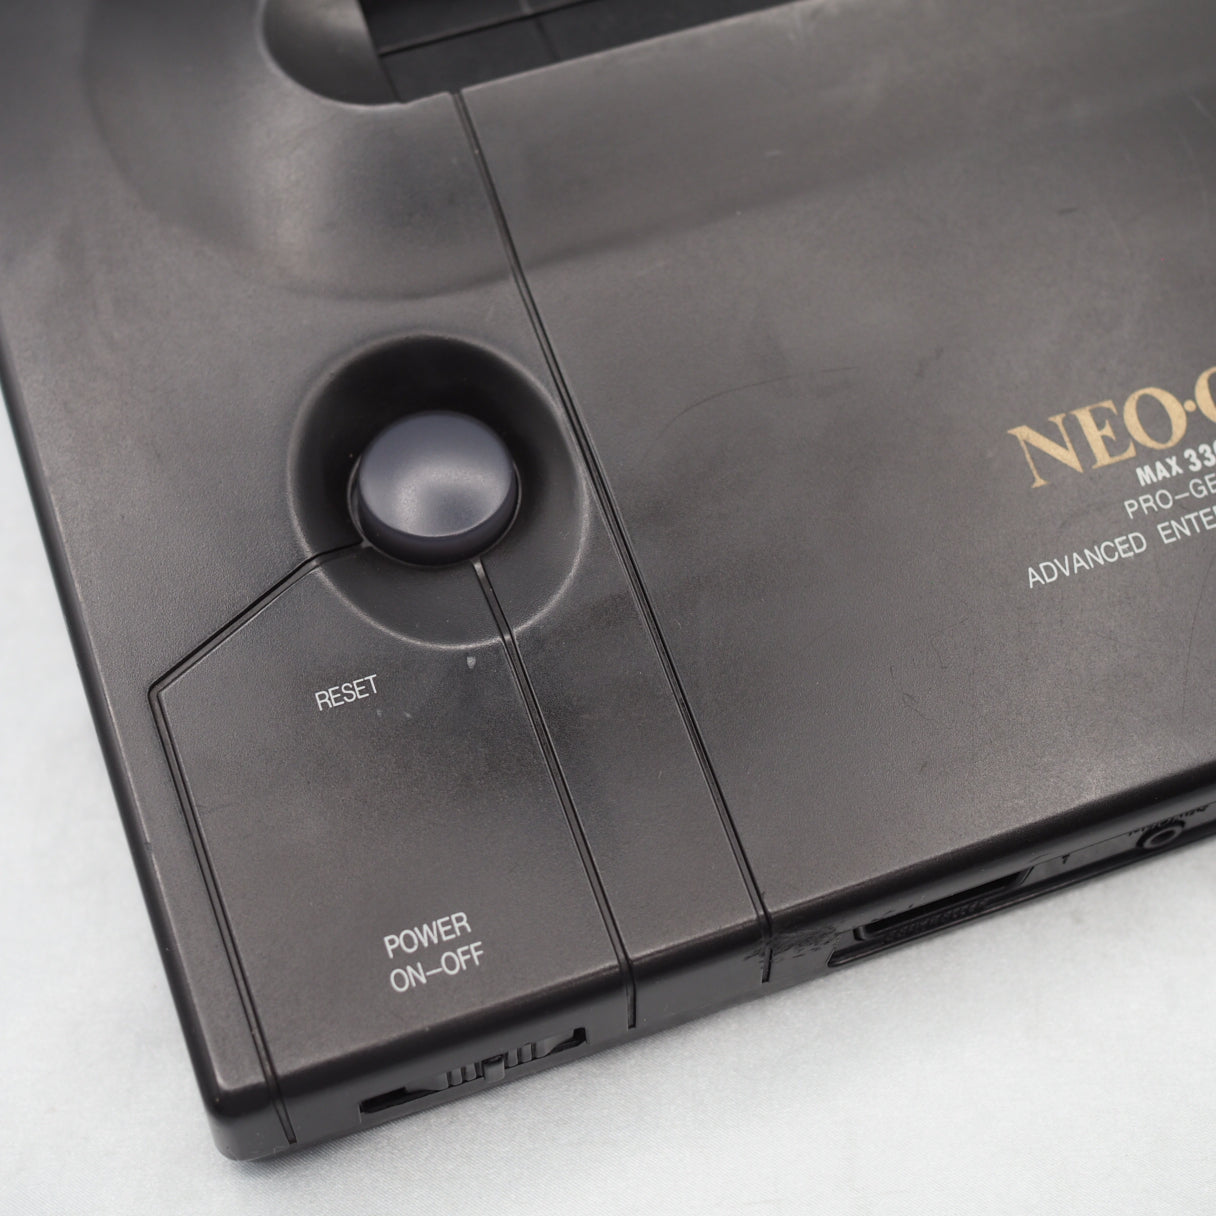 NEO GEO AES Console System & 2 Controllers [UNIBIOS]